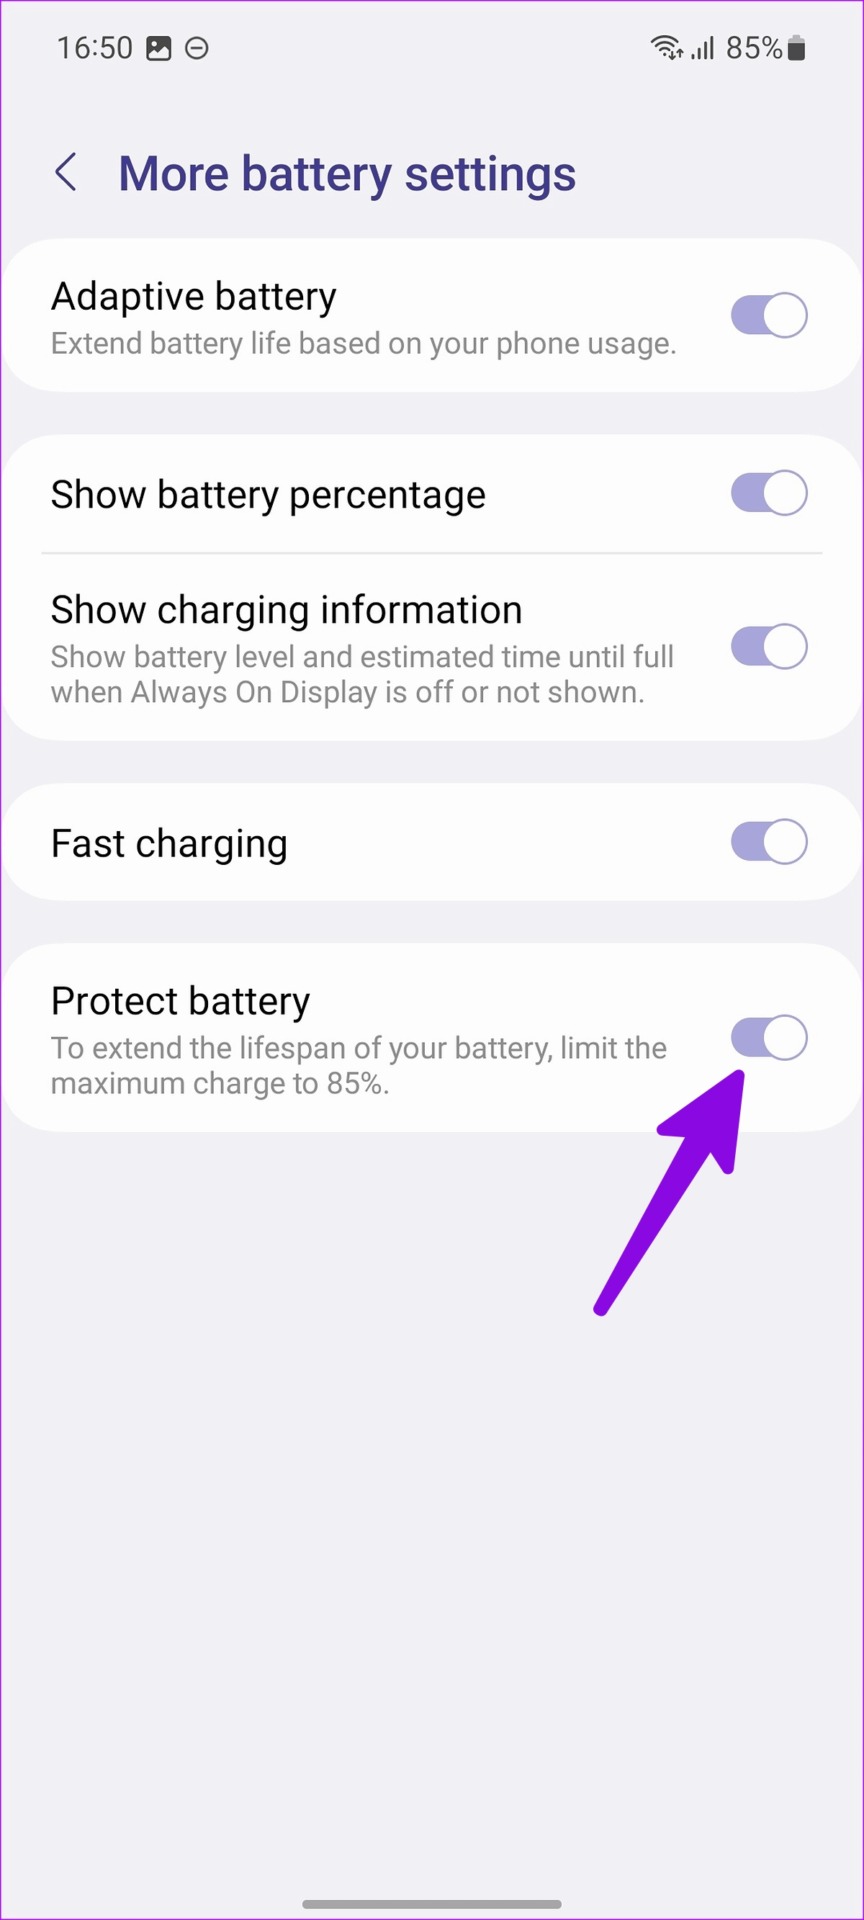 Disable protect battery